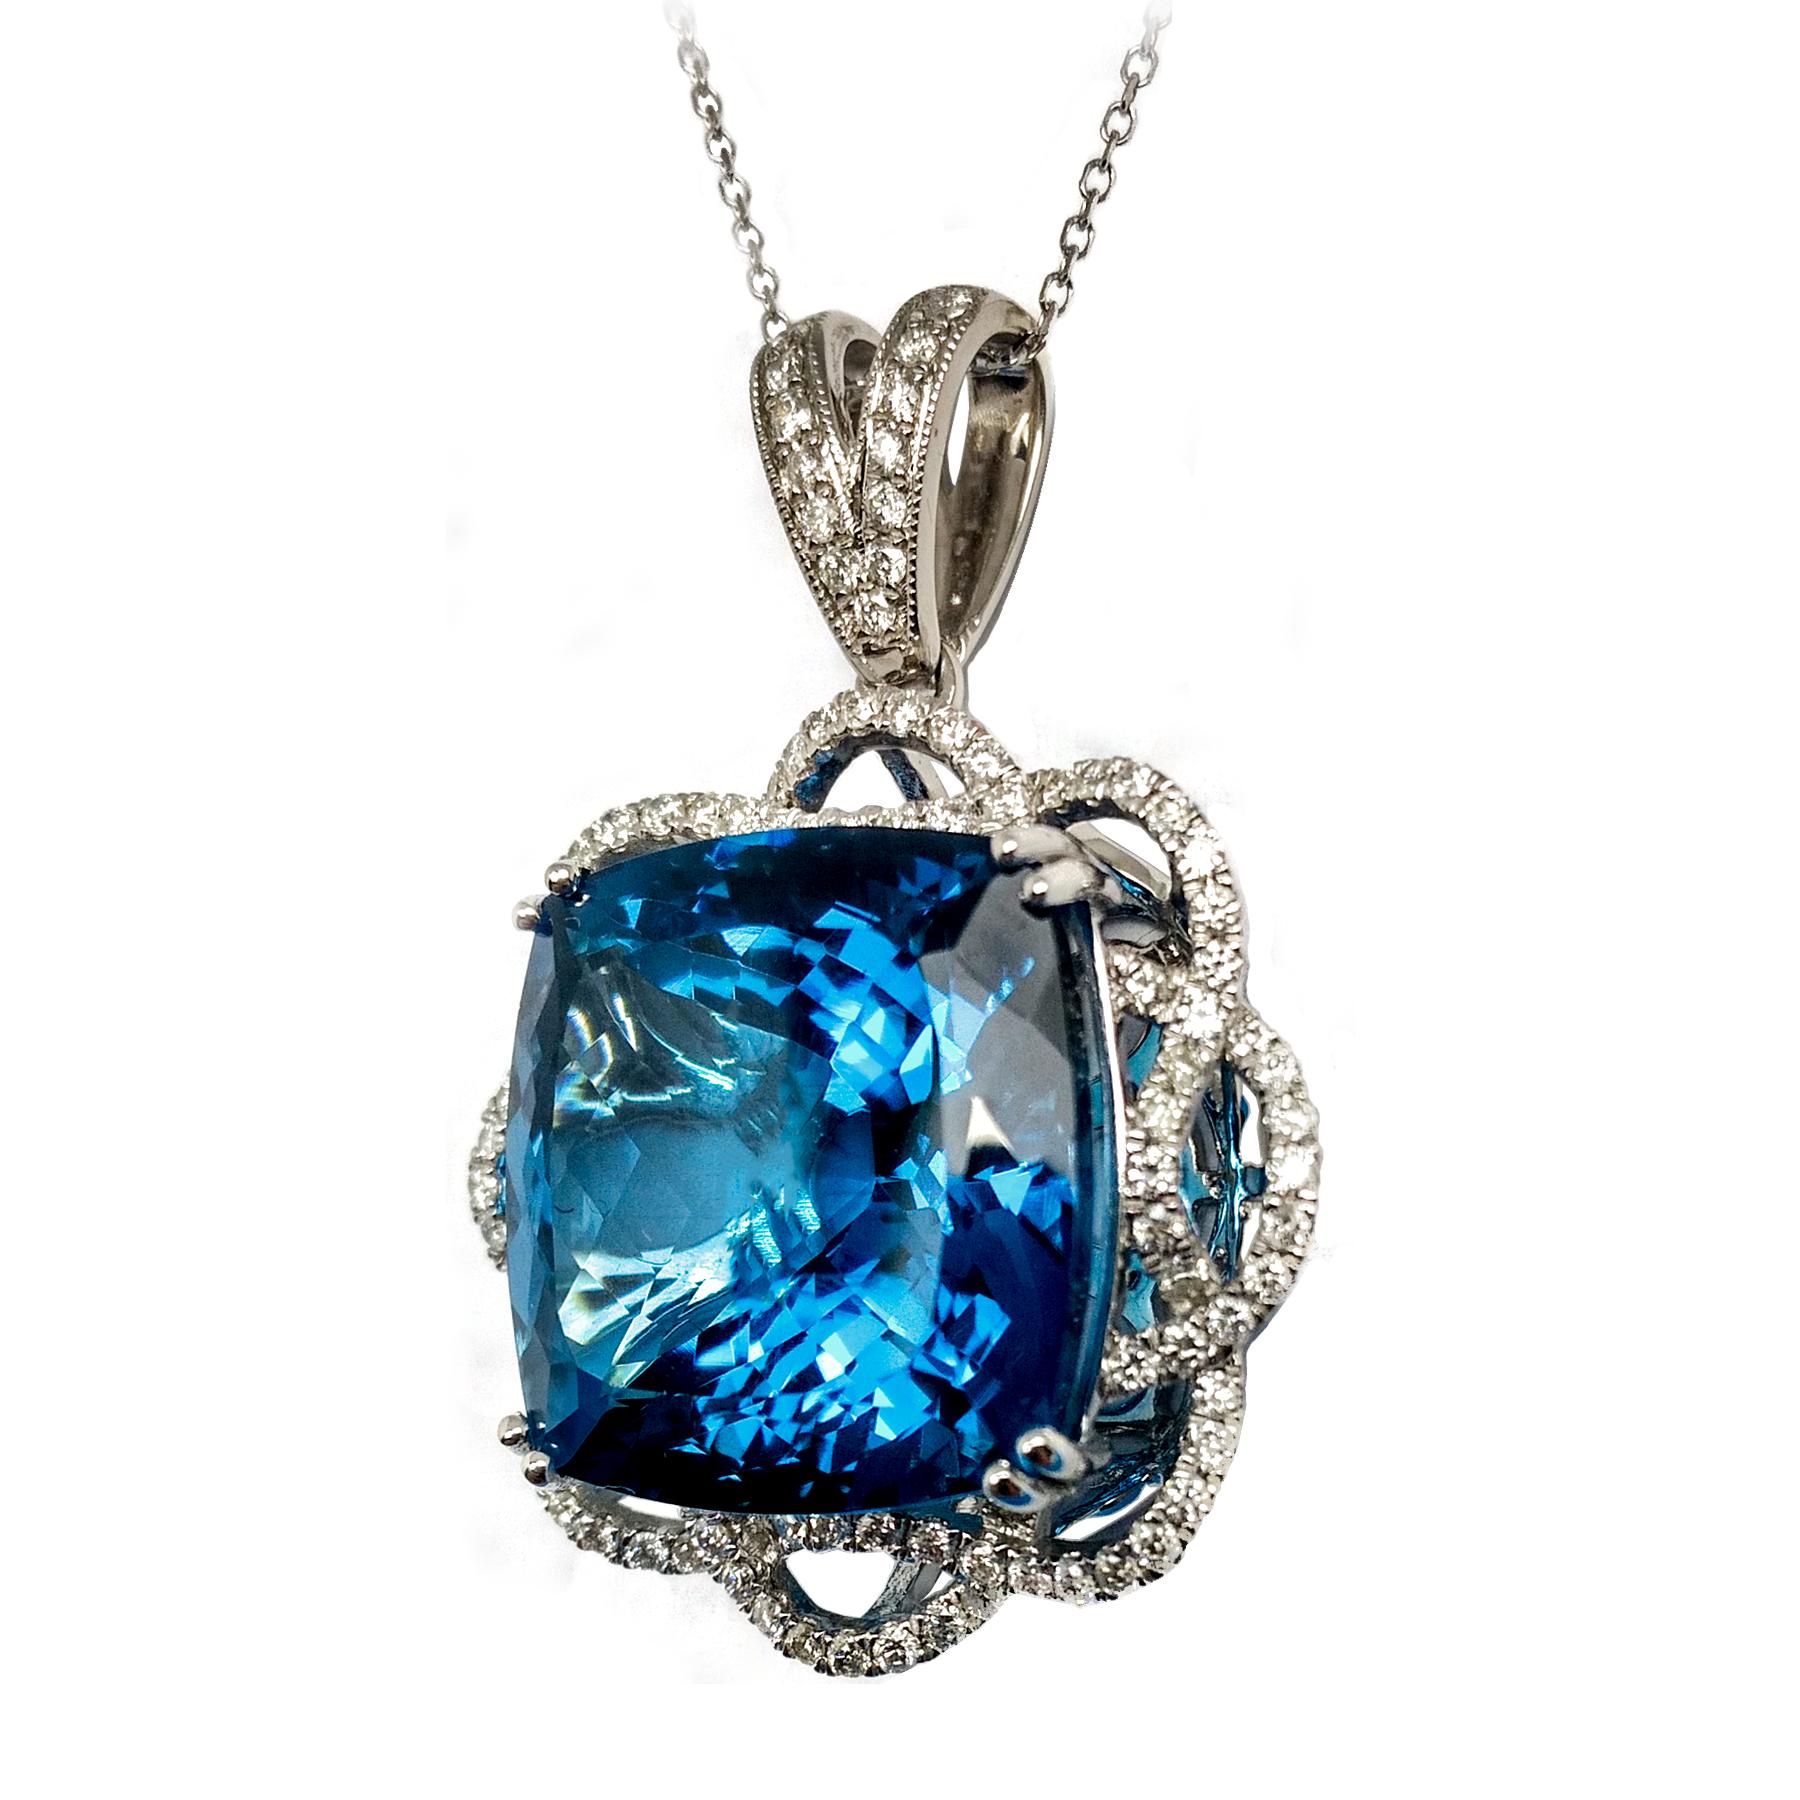 Intense sky blue 23.71 carats topaz and diamond pendant. Contemporary handcrafted cushion faceted, high luster topaz mounted in high profile basket with 4 prongs, accented in round brilliant diamond swirl design in 14 karat white gold, along with 10